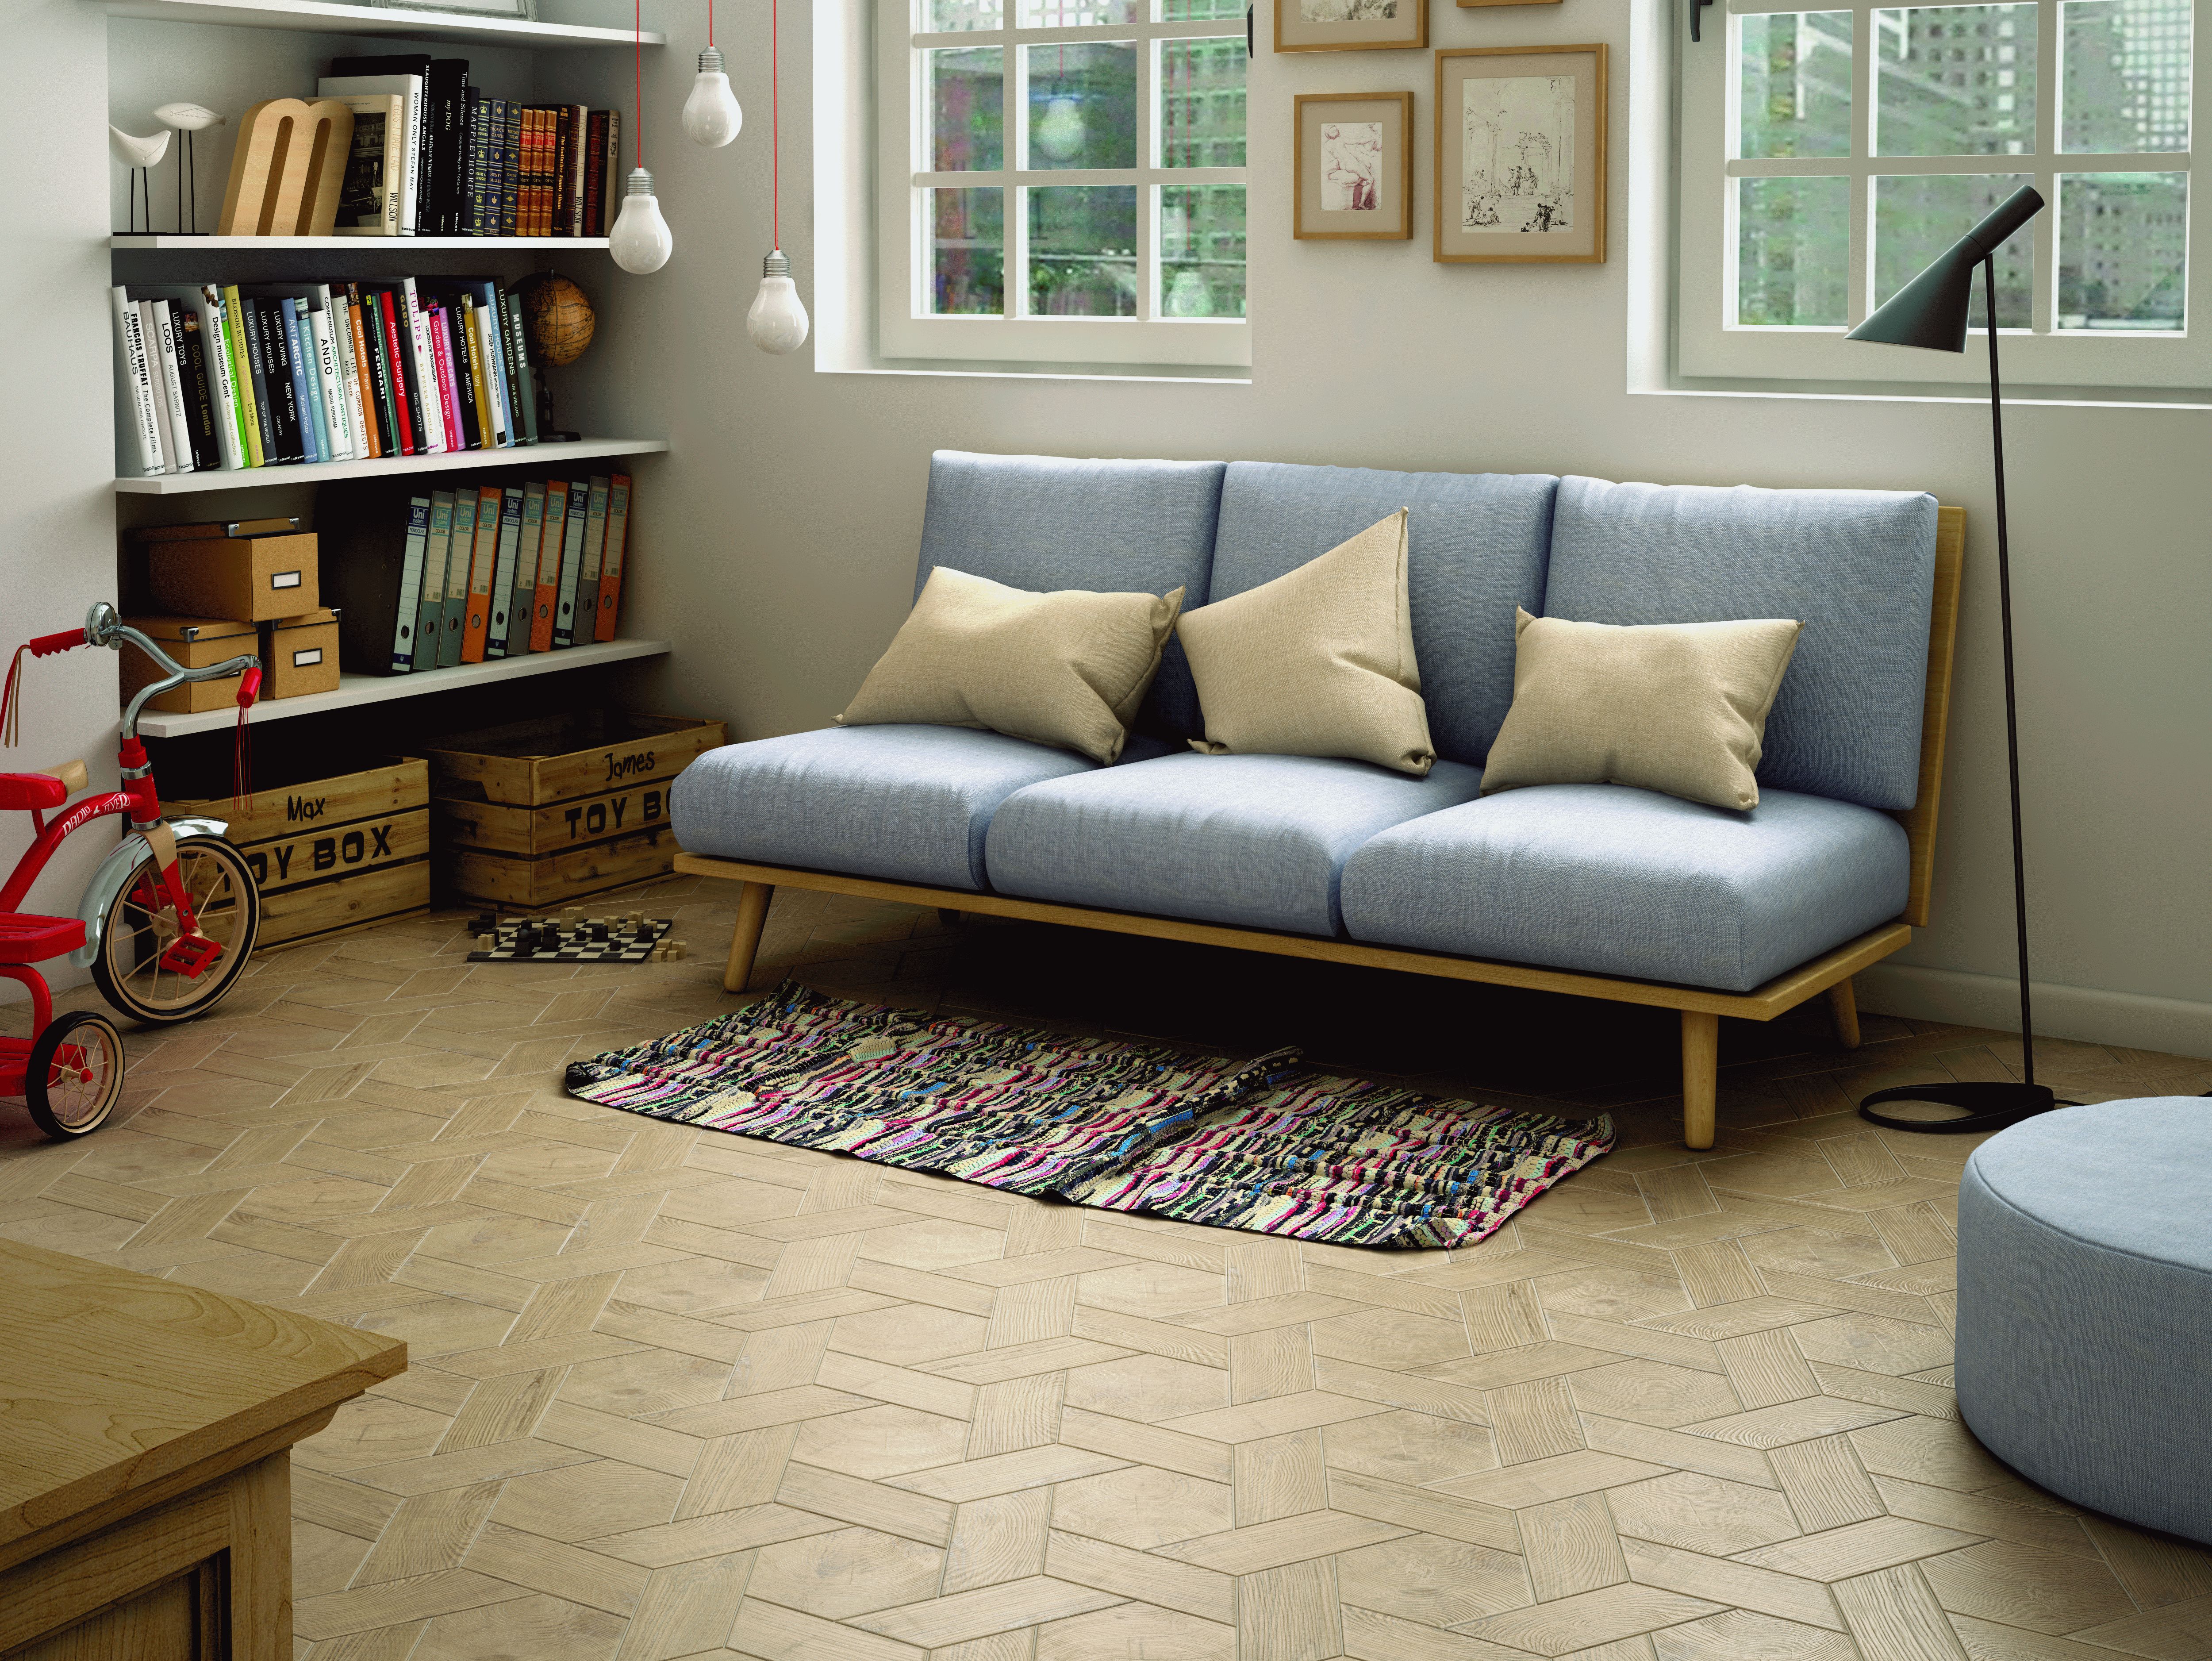 HEXAWOOD Ceramic and Porcelain Tiles by Equipe Ceramicas